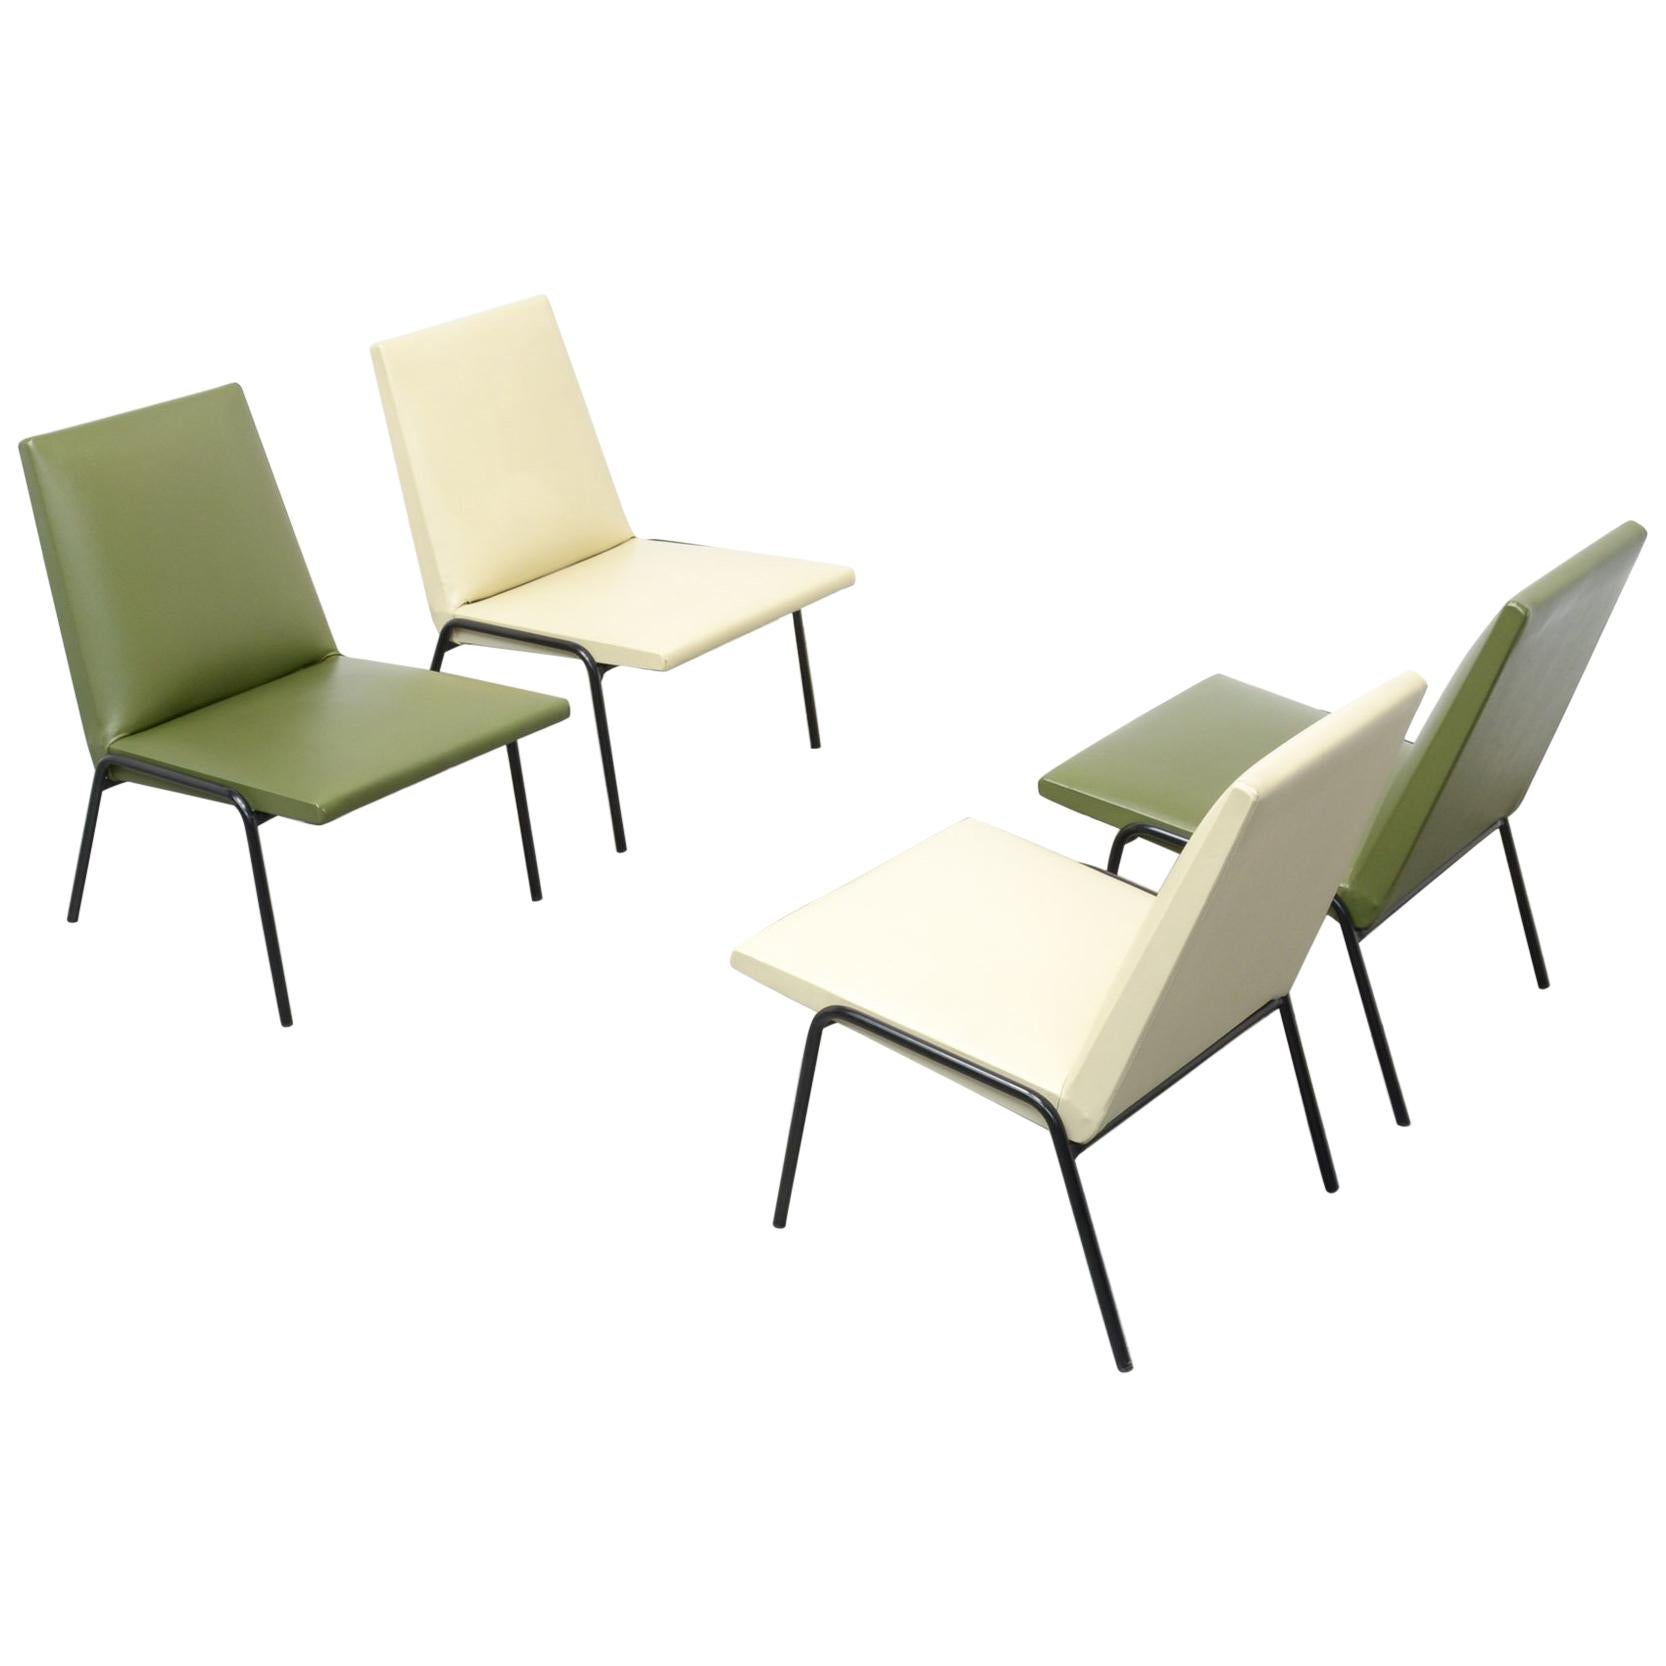 Low Chairs, Robert by Pierre Guariche for Meurop